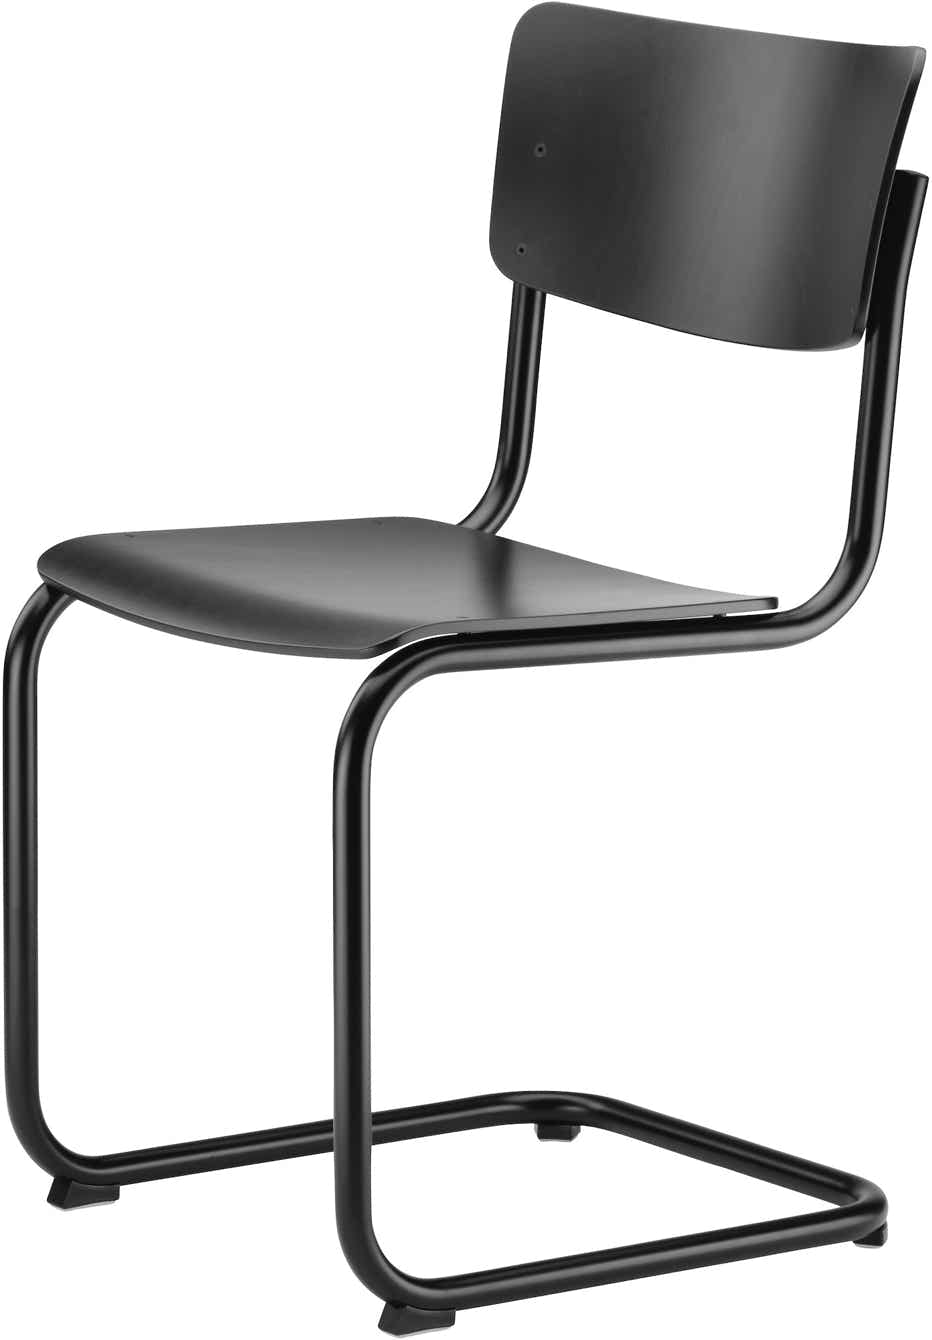 S43 / S43F Chair Mart Stam, 1931 